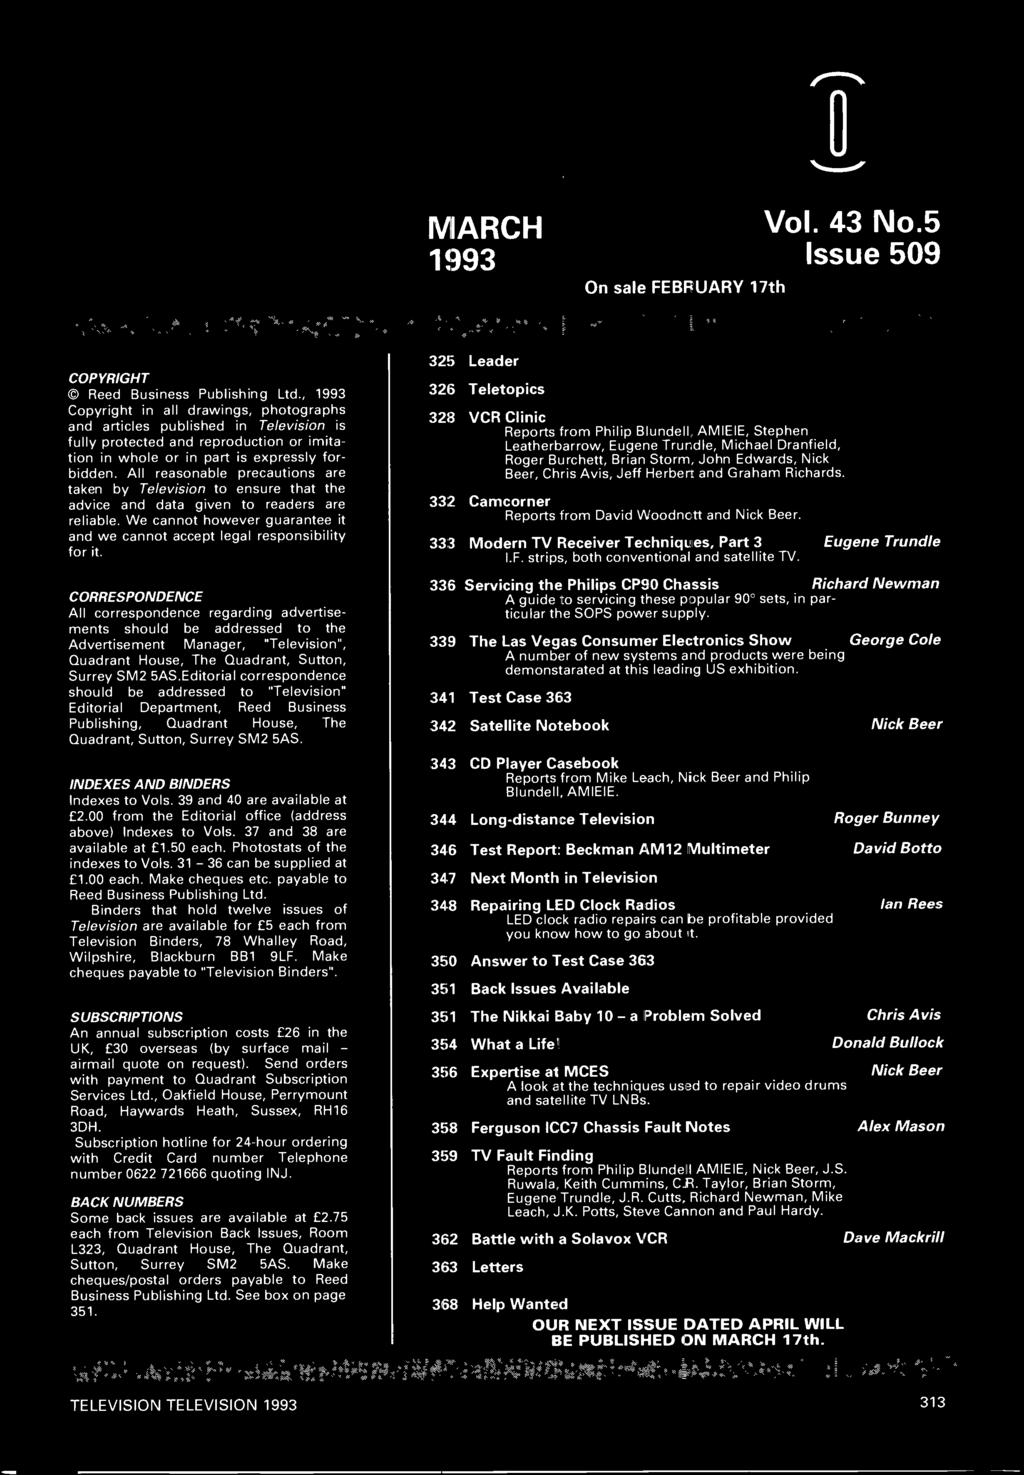 MARCH 1993 On sale FEBRUARY 17th Vol. 43 No.5 Issue 509 COPYRIGHT Reed Business Publishing Ltd.